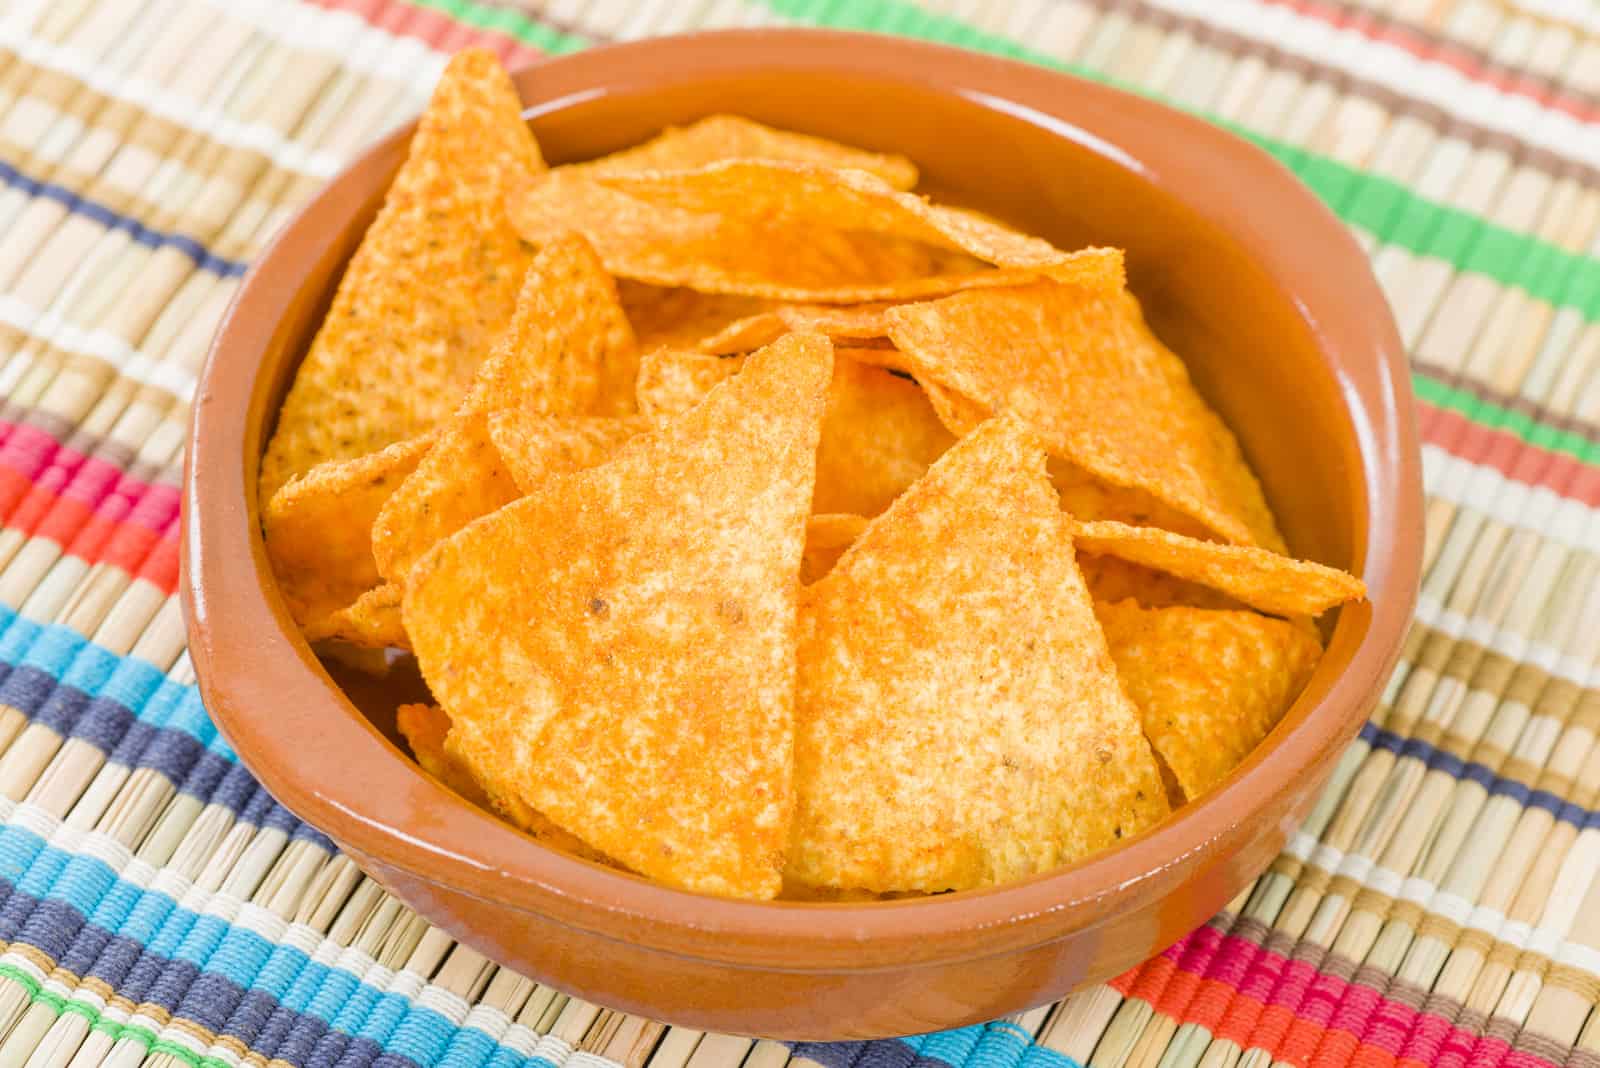 doritos chips in a bowl on the table